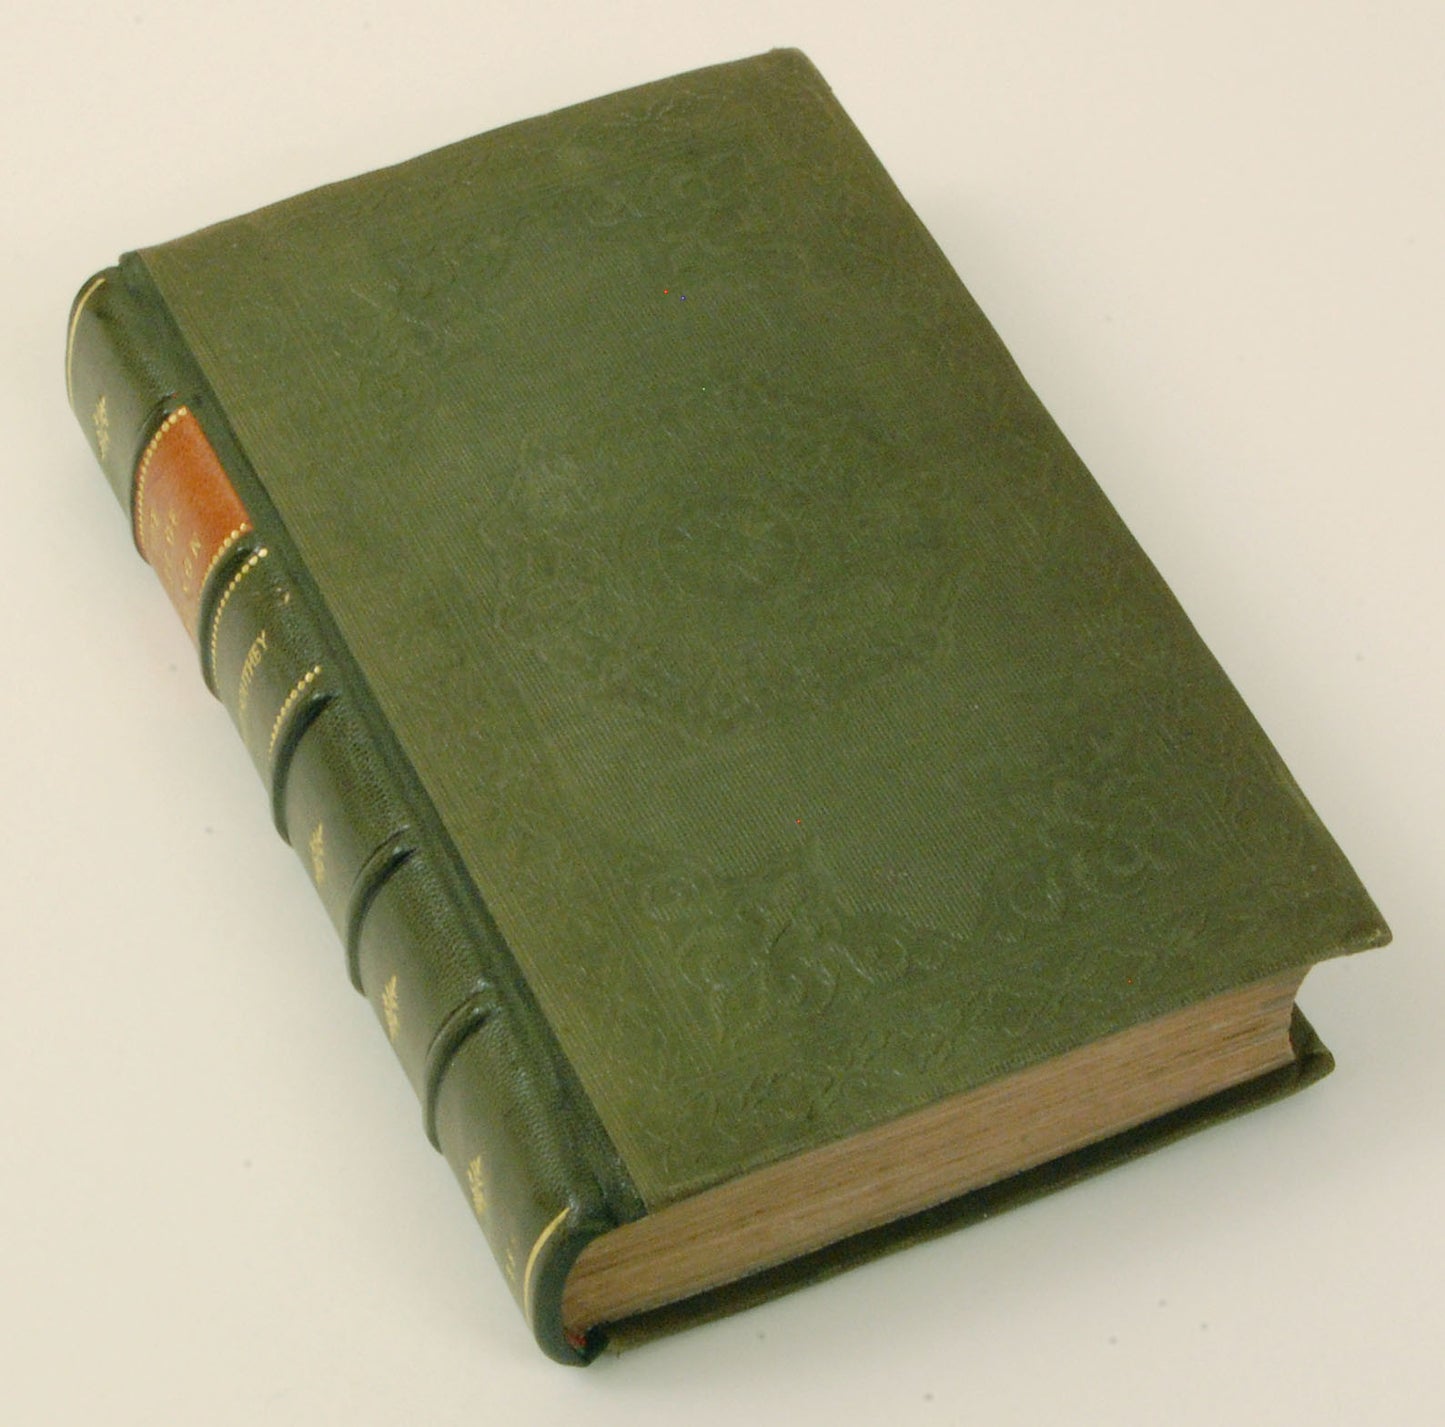 Antiquarian Book - The Life of Nelson by Robert Southey, 1861